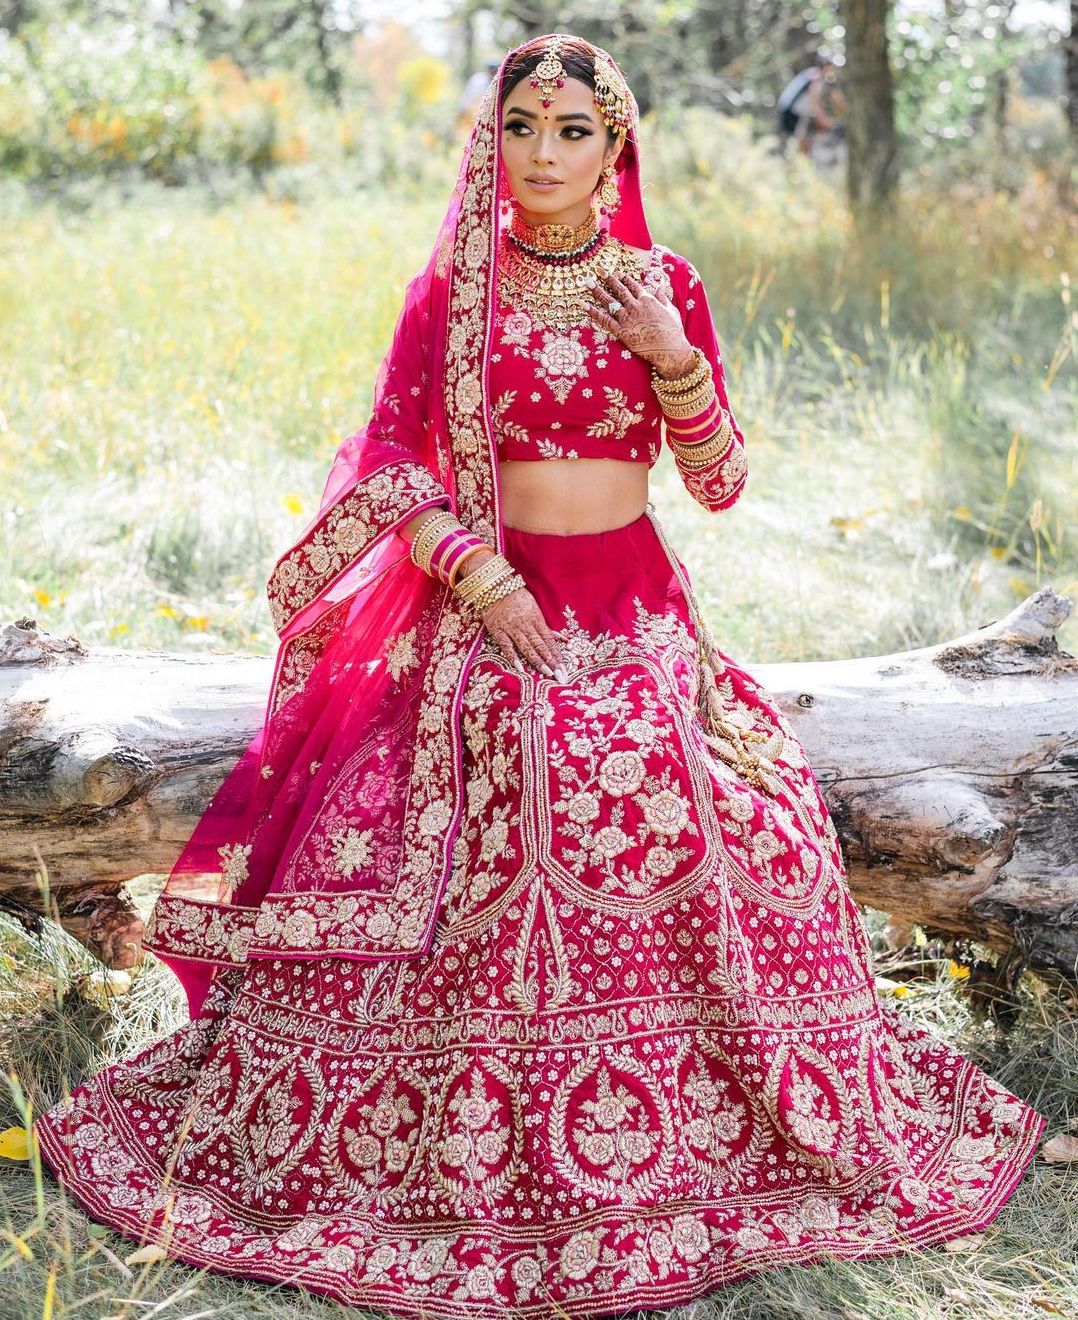 5 embroidery trends in bridal lehenga styles to ace royal bride look on  wedding | Fashion Trends - Hindustan Times